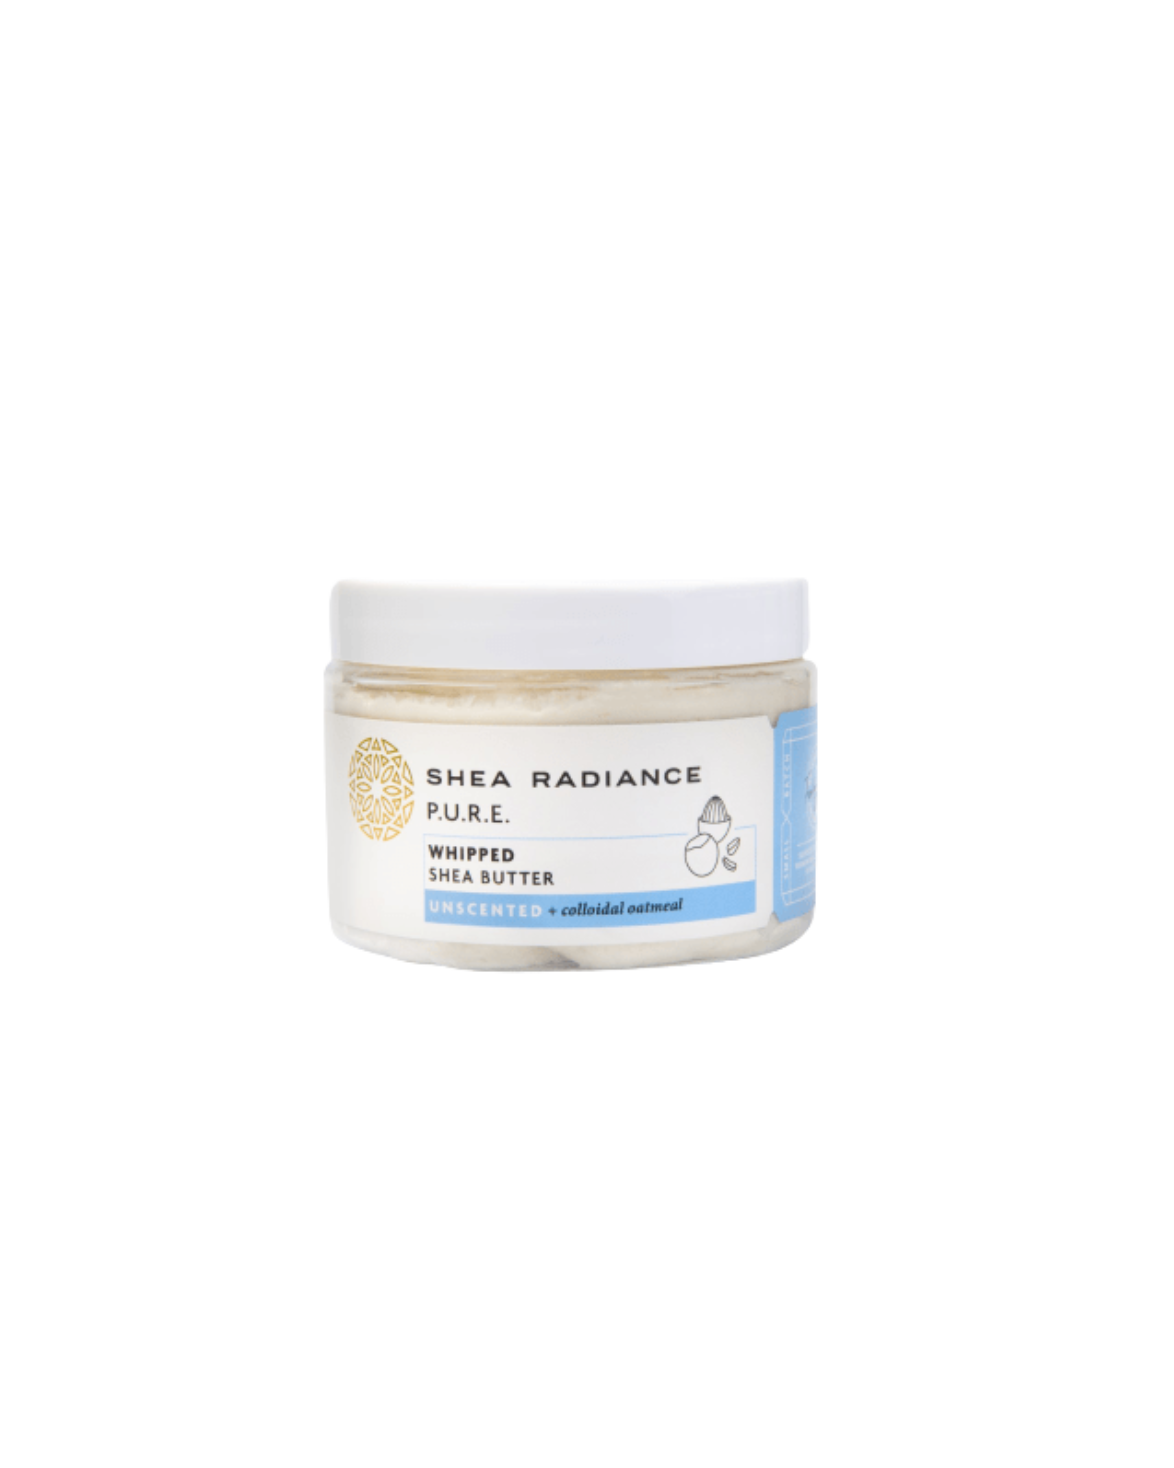 Whipped Shea Butter with Colloidal Oatmeal